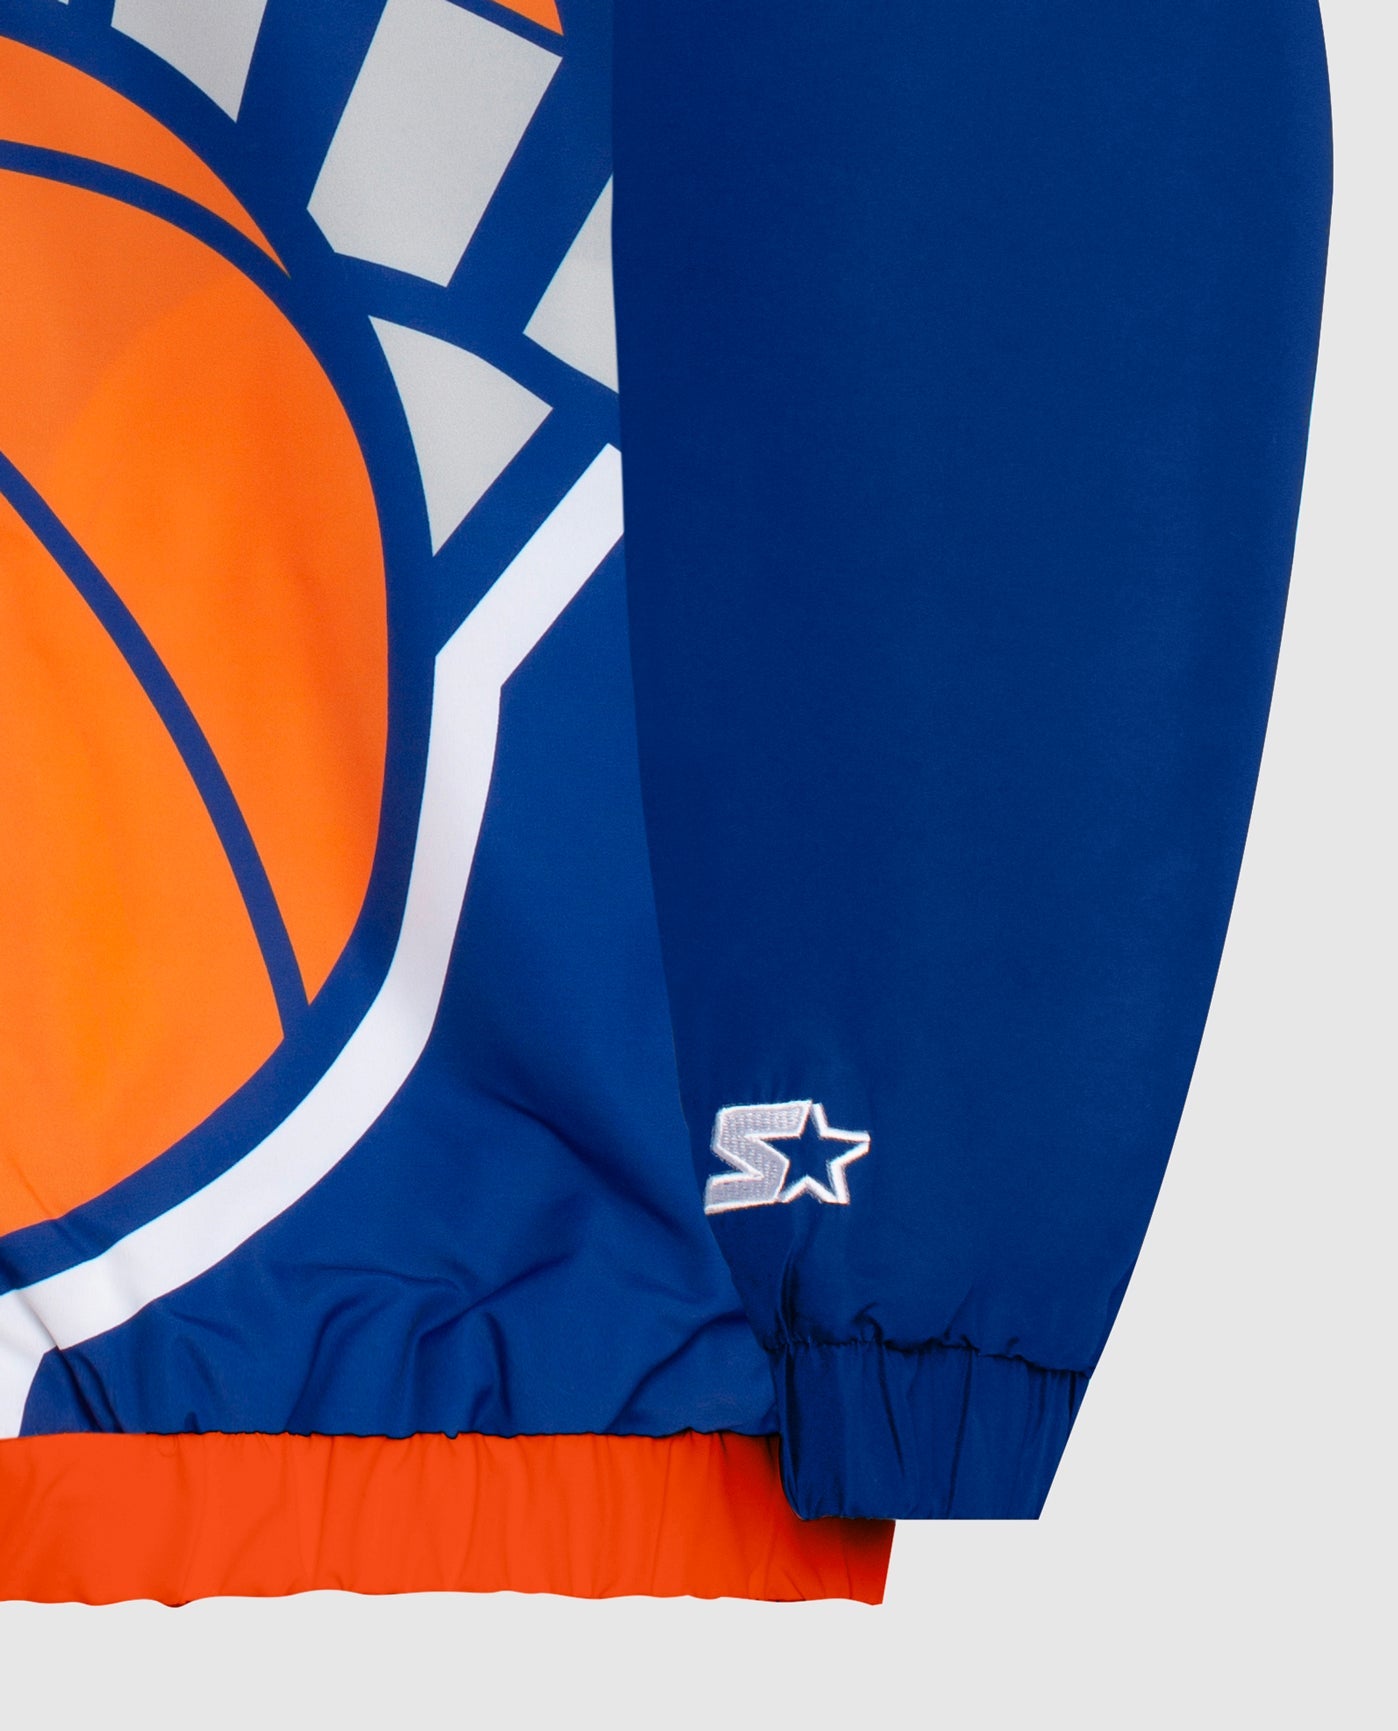 New York Knicks by MITCHELL & NESS of (Blue color) for only $51.00